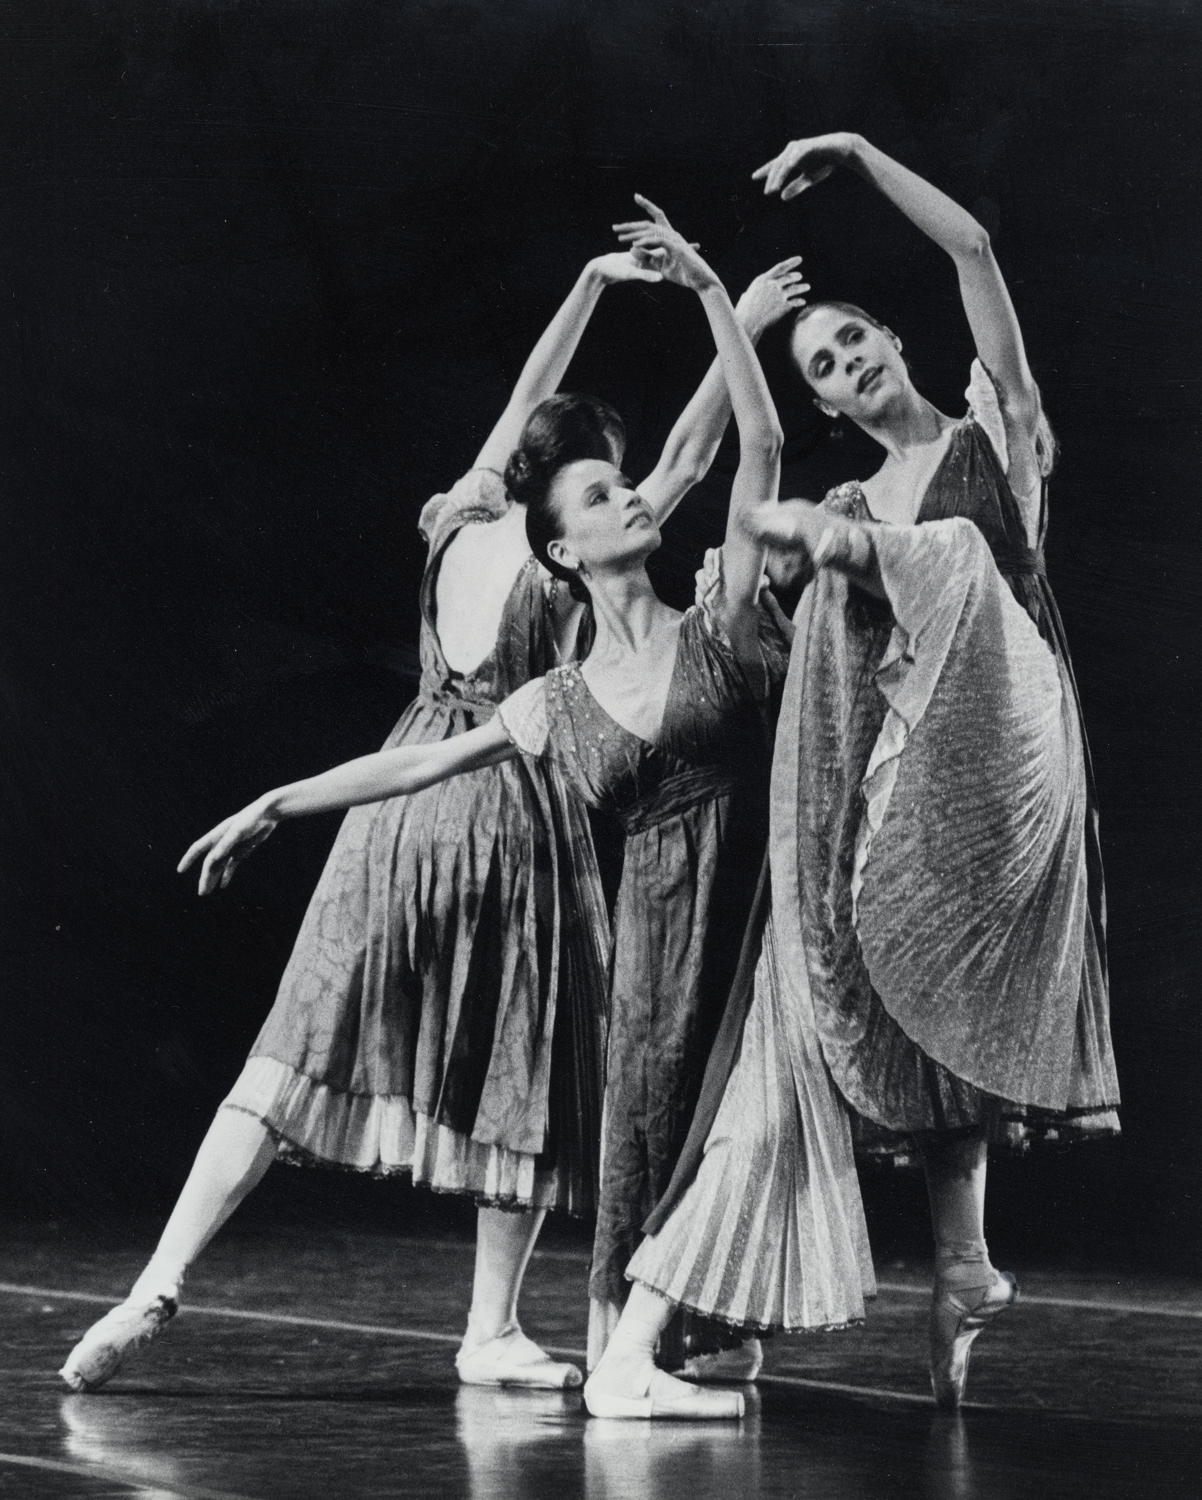 The Twyla Zone: Ballets dancers cherish working with 